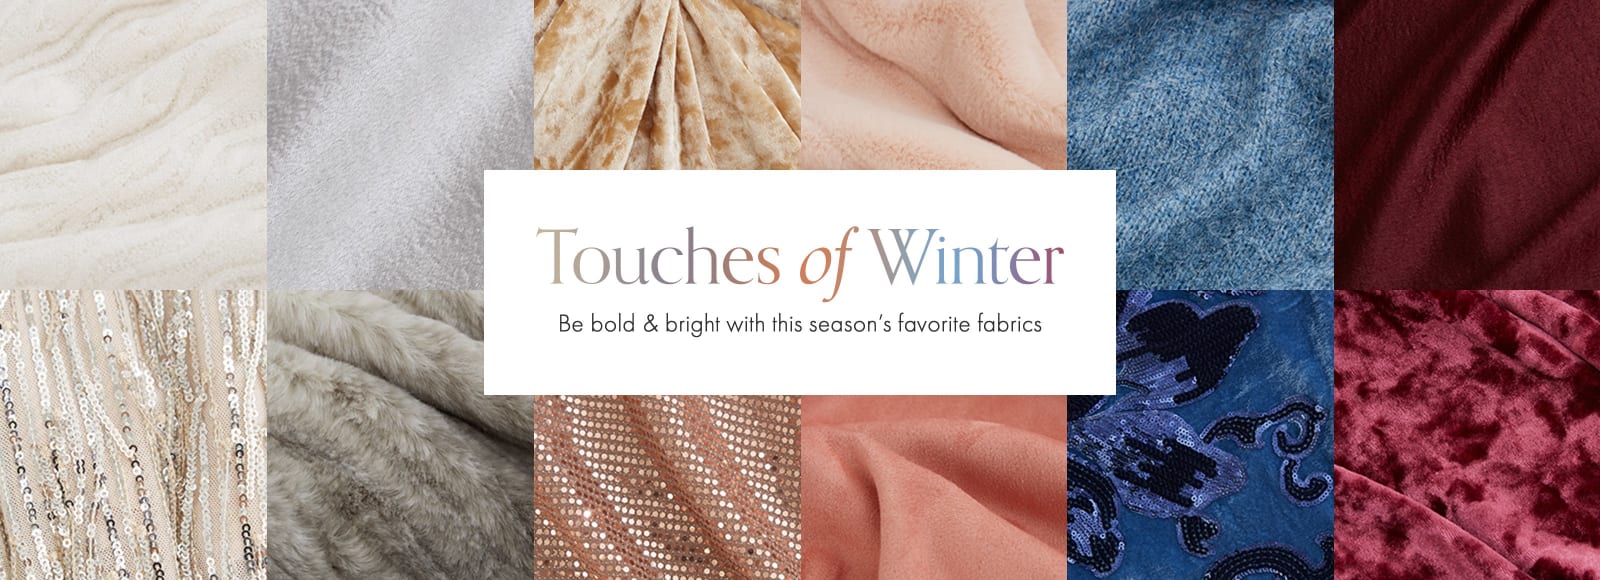 Touches of Winter. Be bold & bright with this season’s favorite fabrics